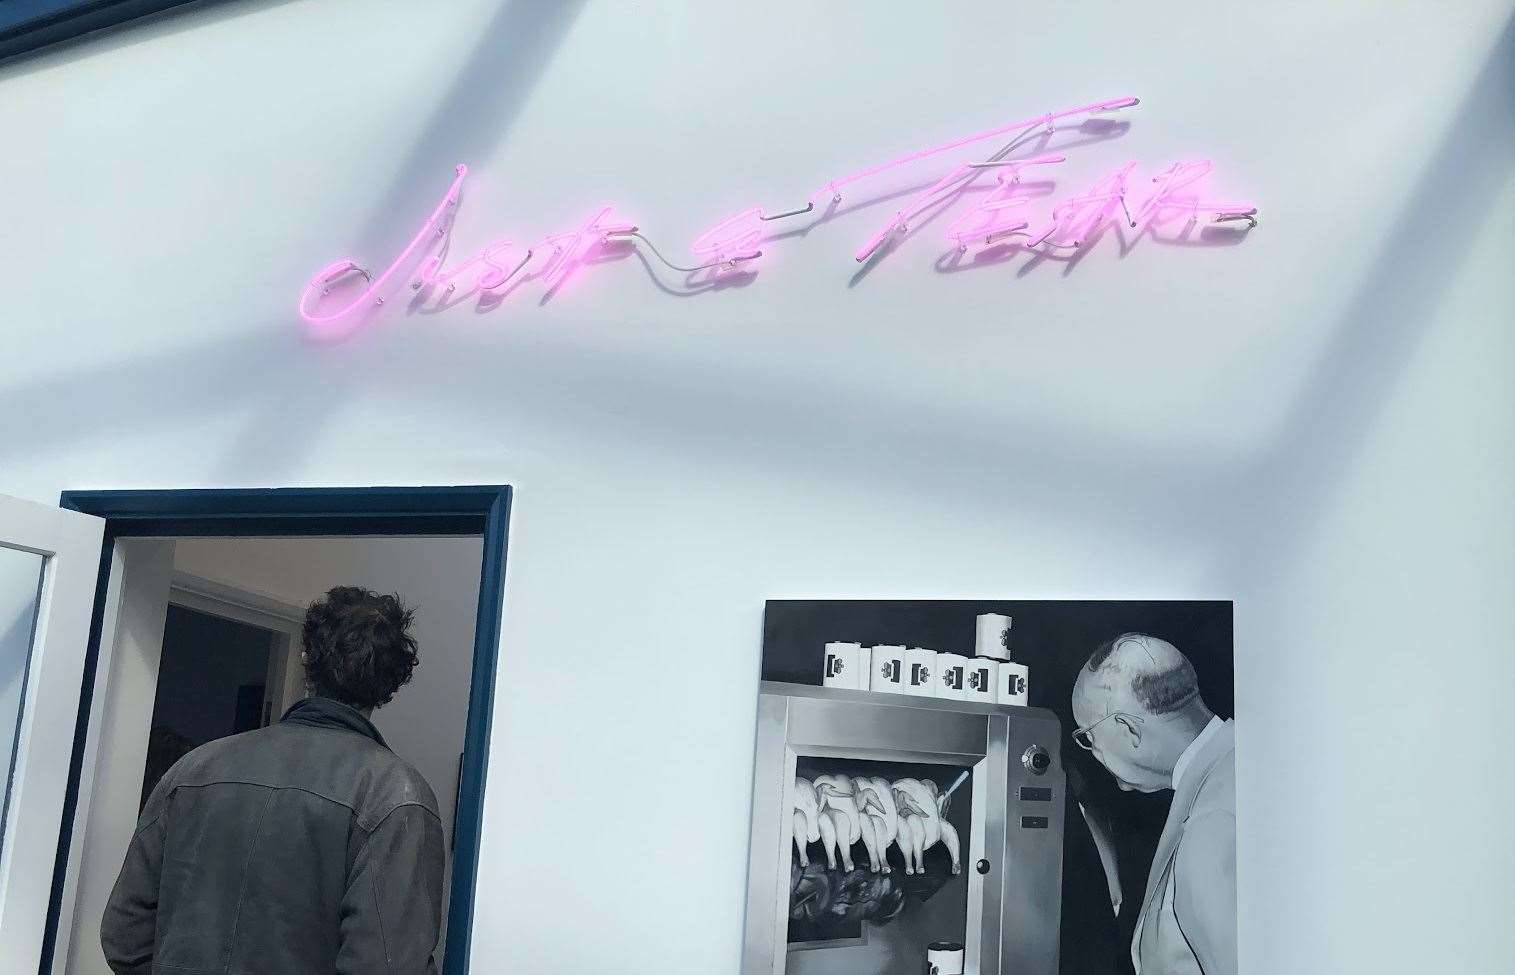 Some of Tracey Emin's own work was on display